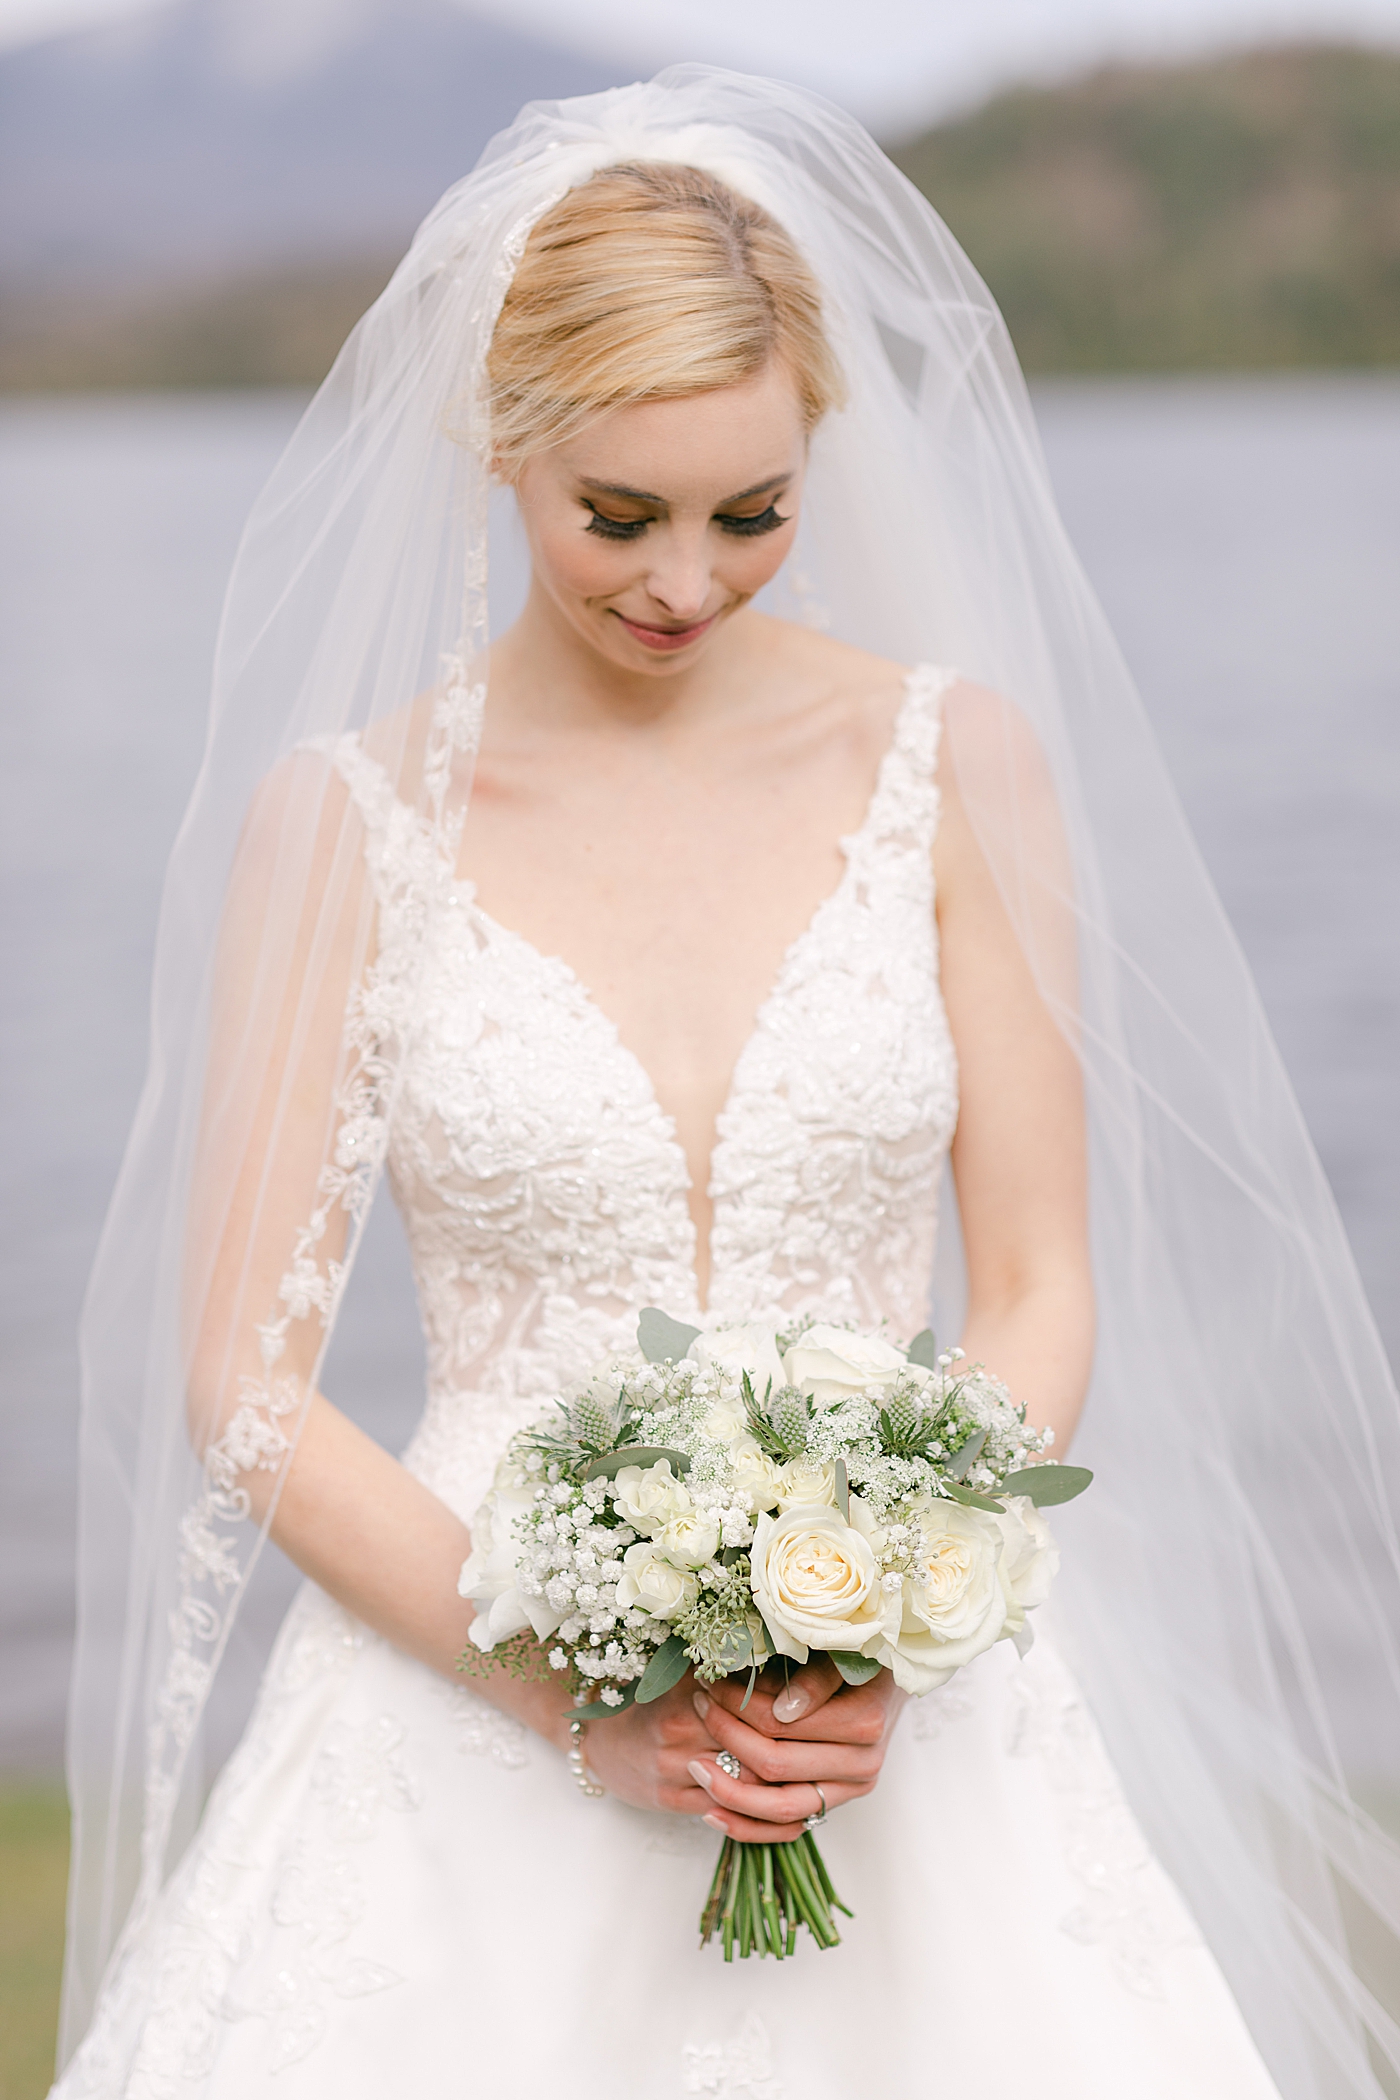 Bride wearing a veil holding a bouquet | Image by Hope Helmuth Photography